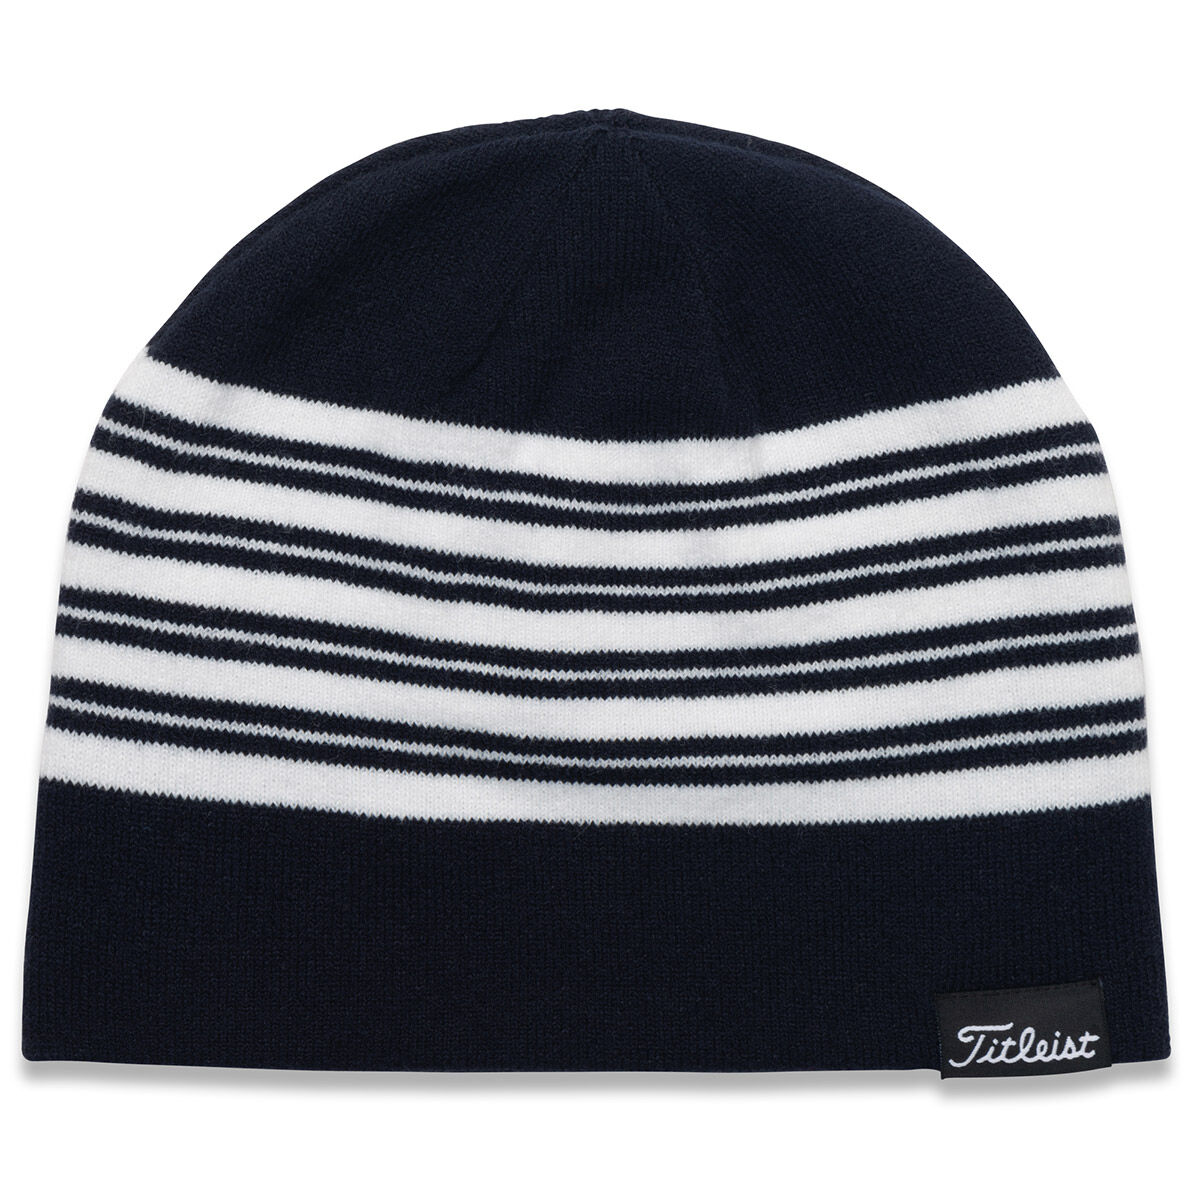 Titleist Navy Blue and White Lifestyle Reversible Beanie Hat, One Size | American Golf